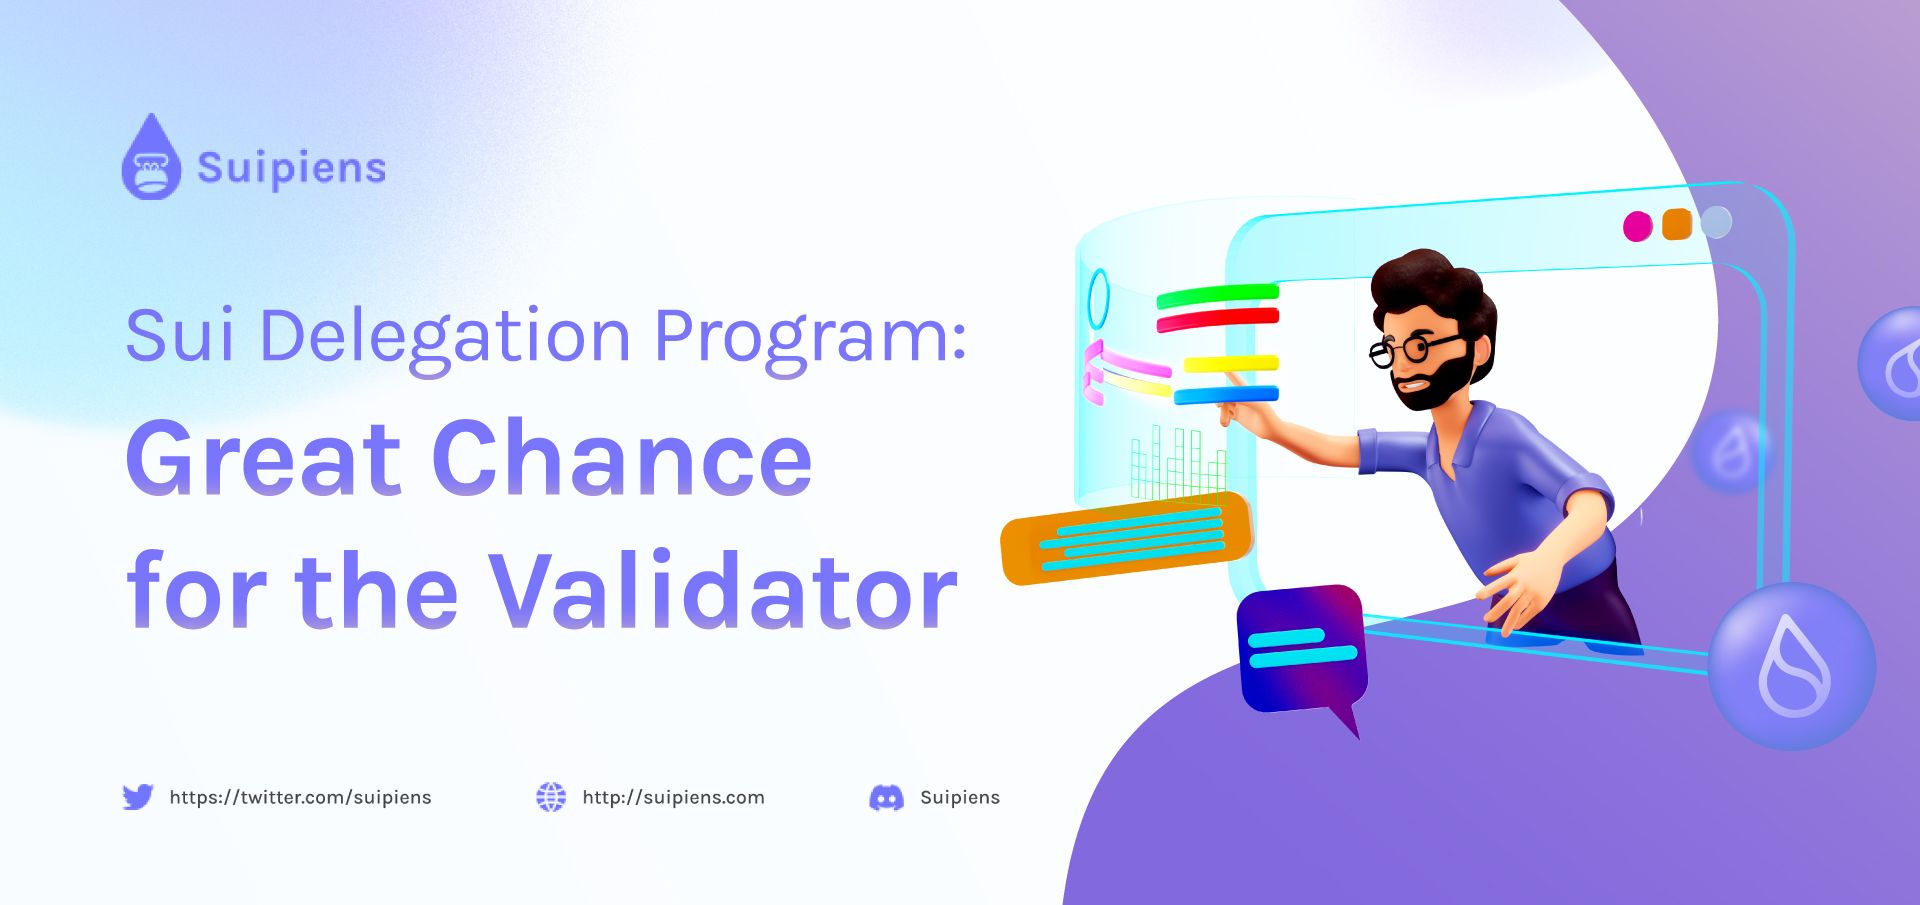 Sui Delegation Program: Great Chance for the Validator